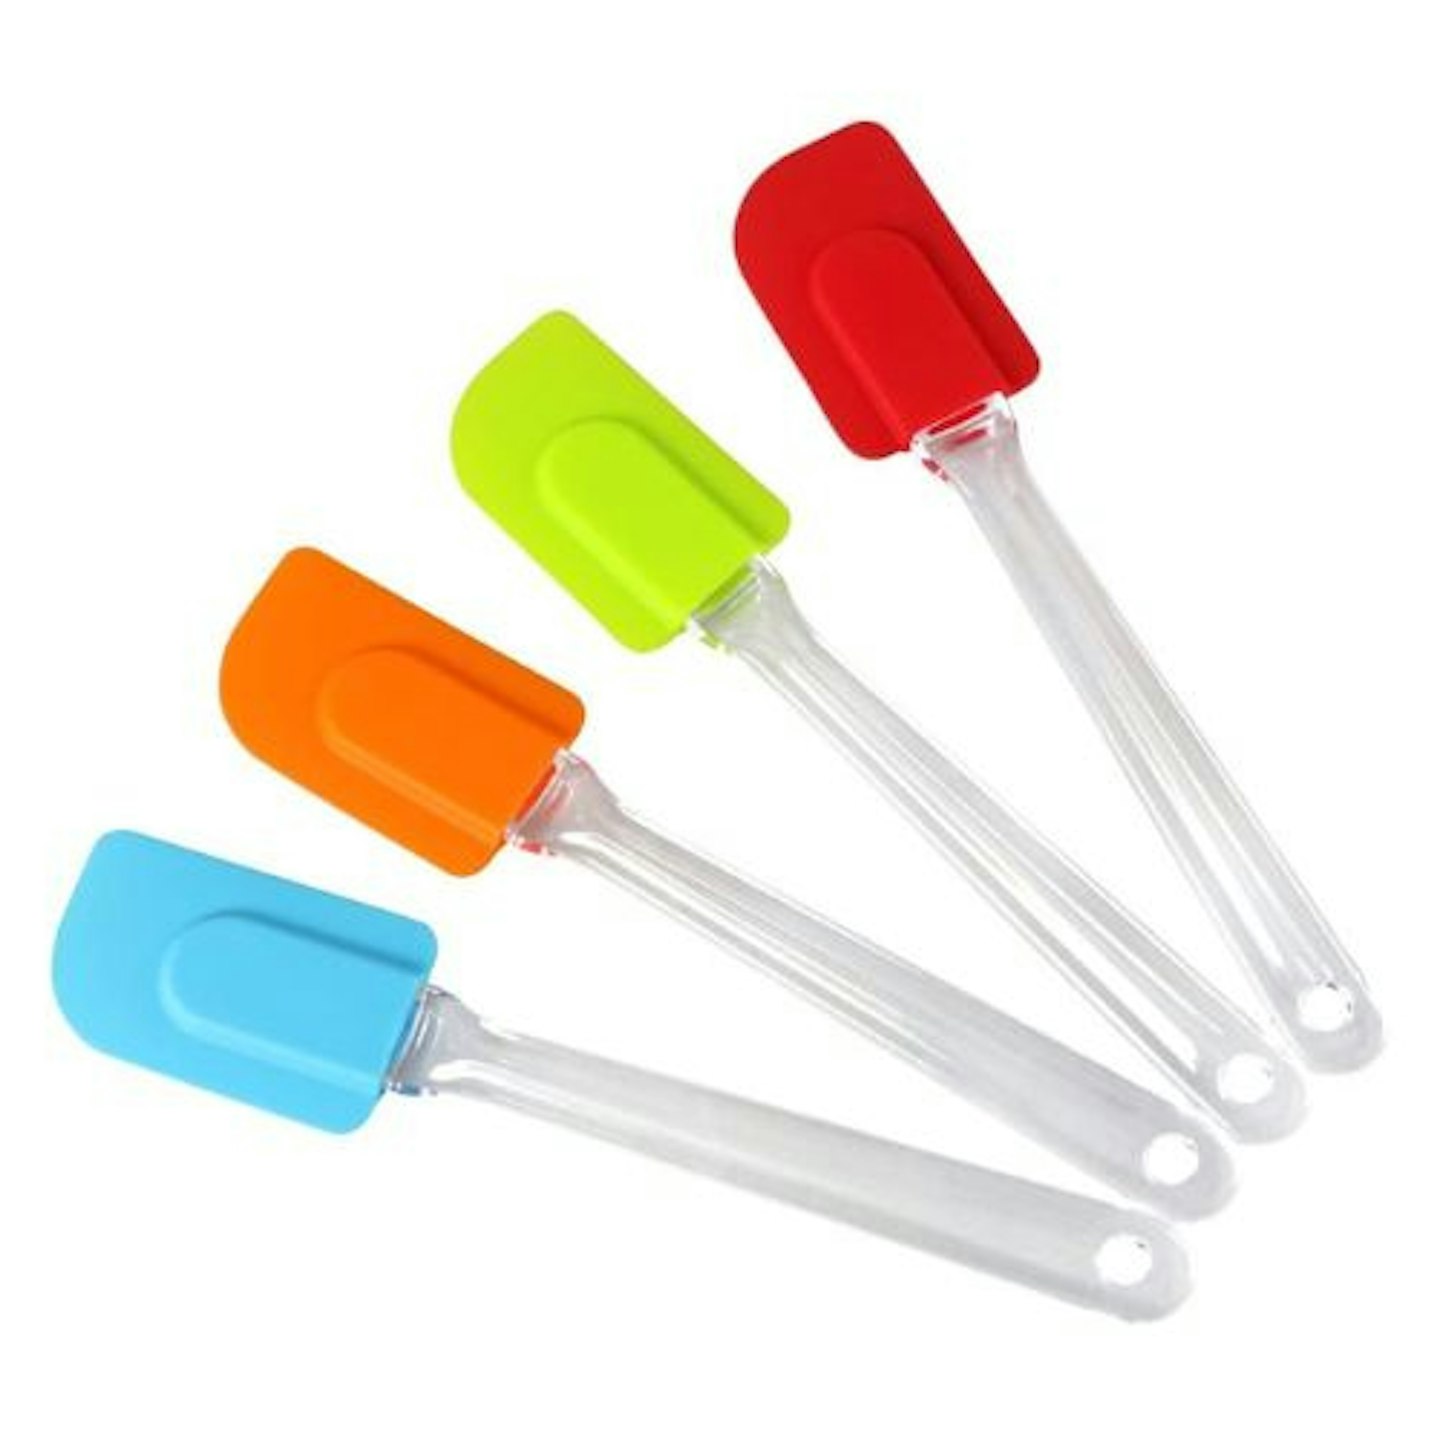 Vicloon Silicone Spatula Set, 4 PCS Heat Resistant Spoon Spatula Colorful Cake Cream Butter Spatula, Kitchen Silicone Mixing Scraper Tool Utensils Set for Cooking and Baking